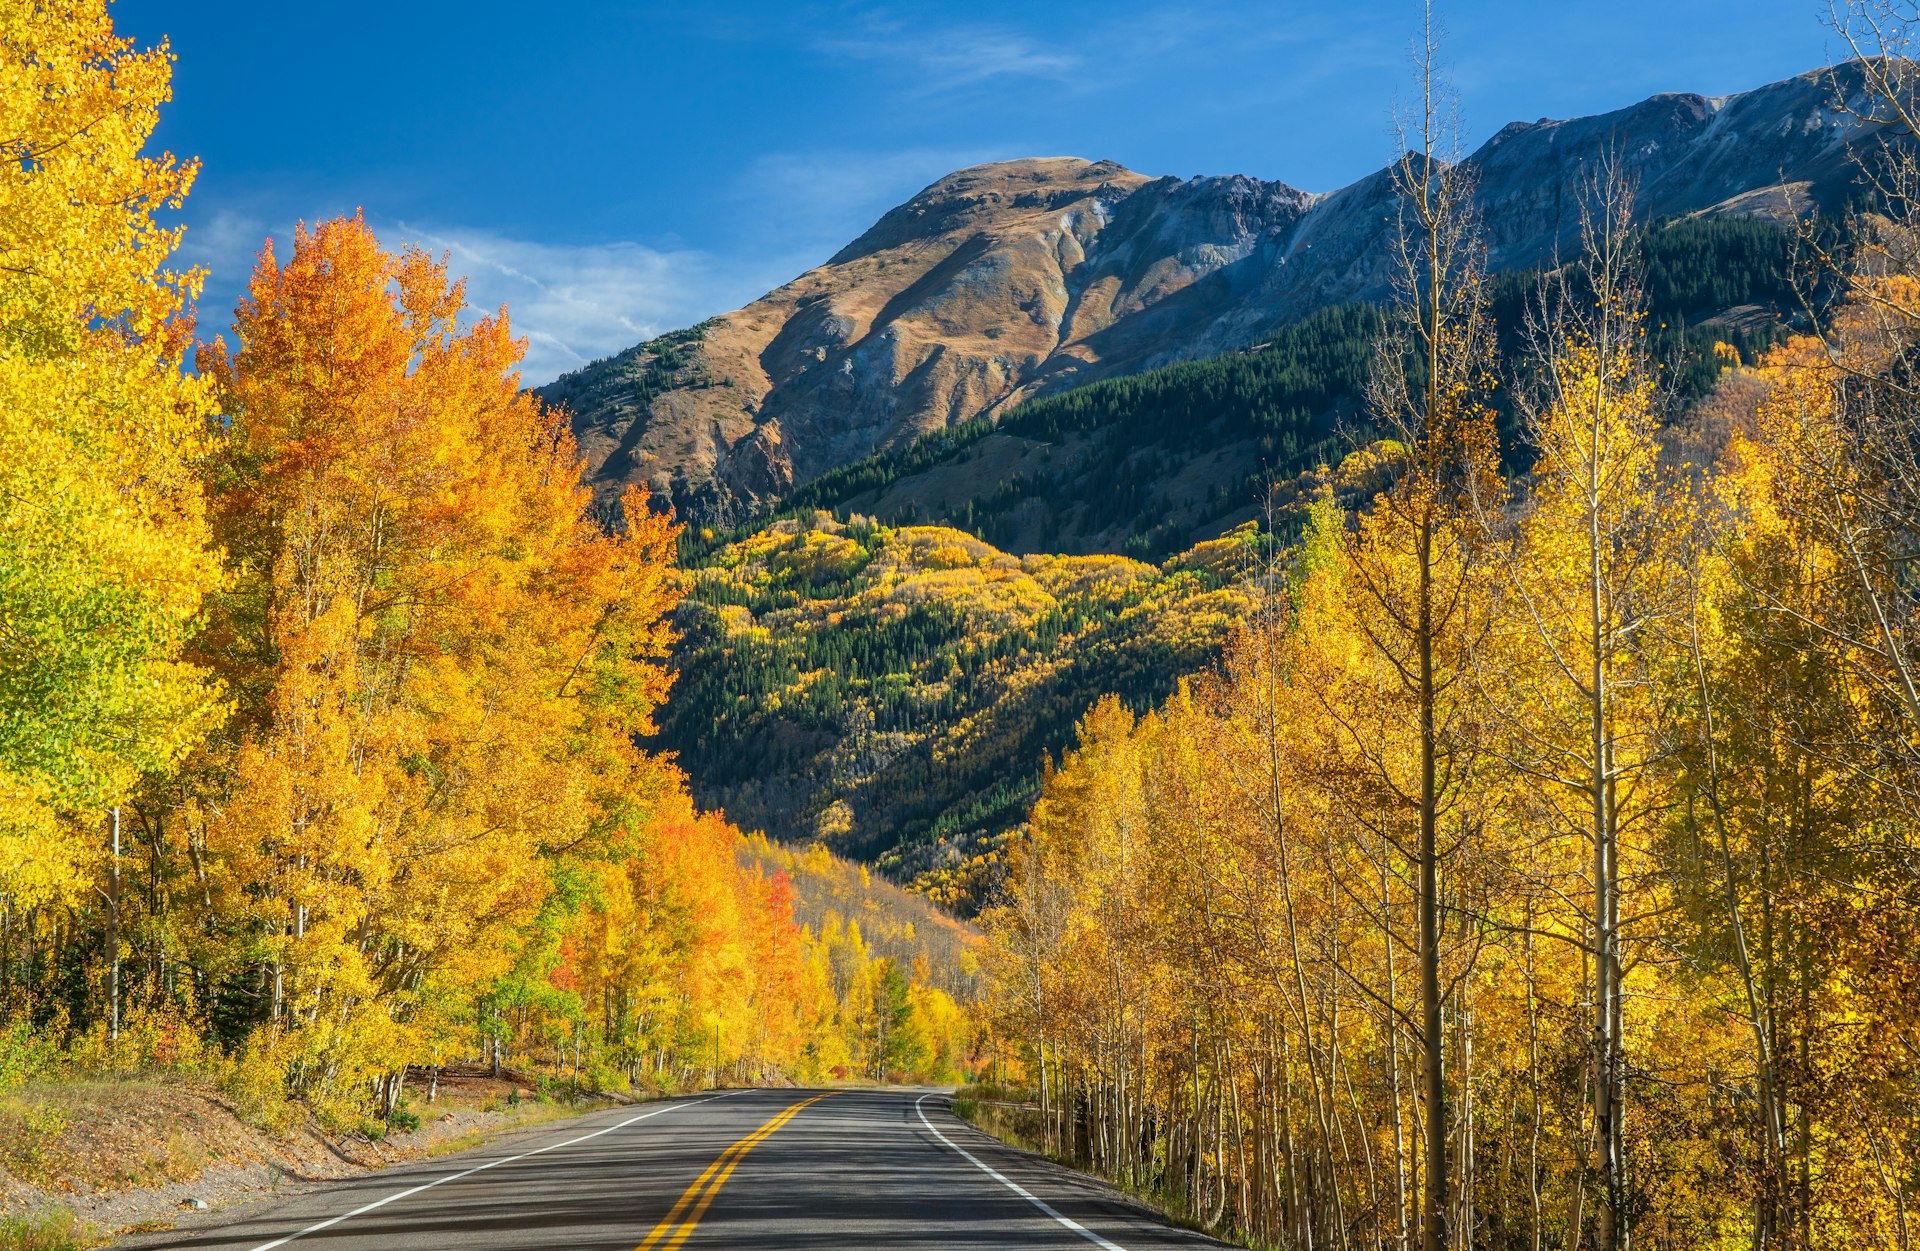 The Million Dollar Highway in Colorado surrounded by gold-colored tree leaves in fall